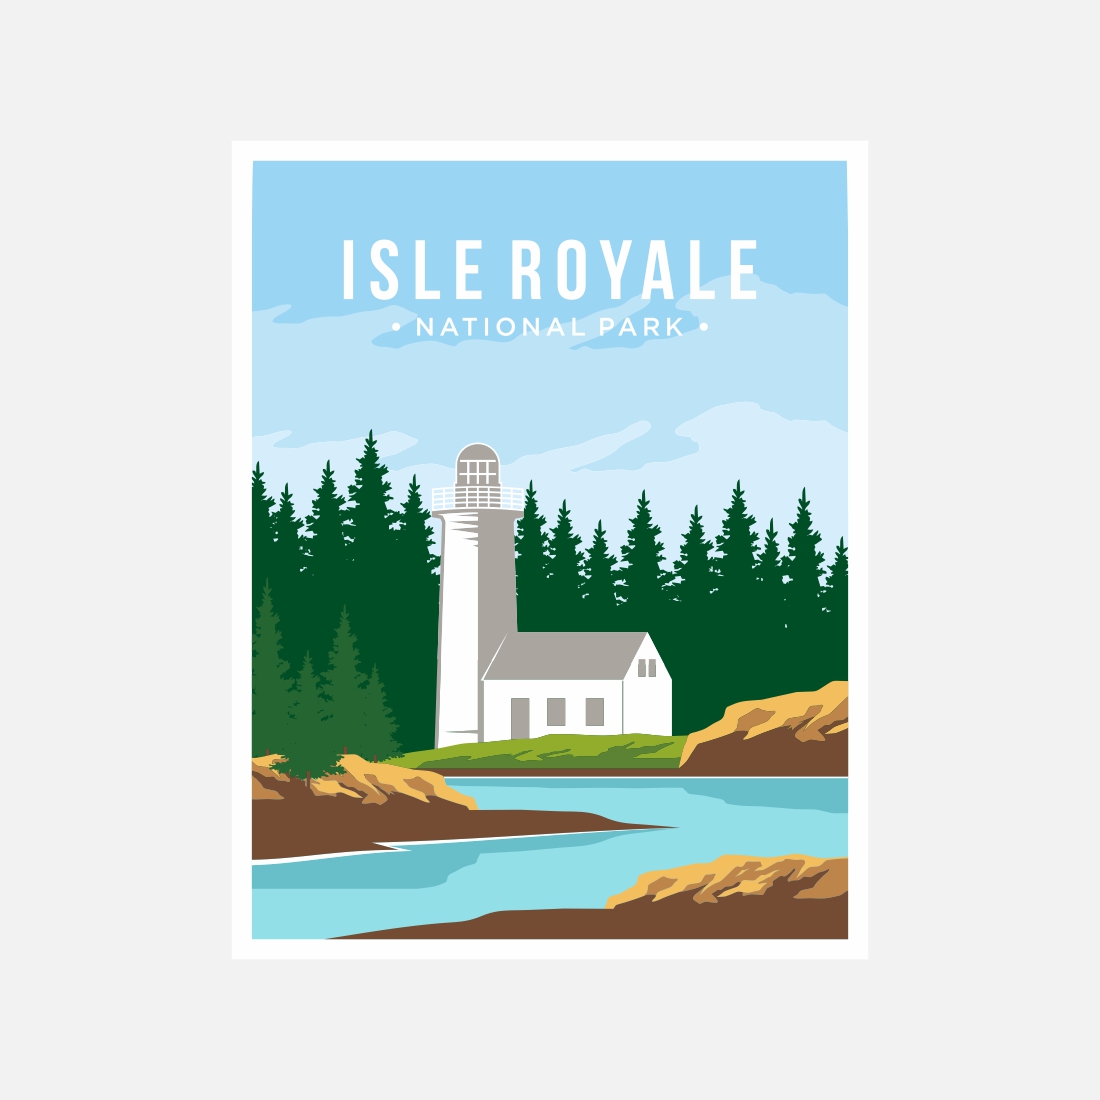 Isle Royale national park poster vector illustration design – Only $8 preview image.